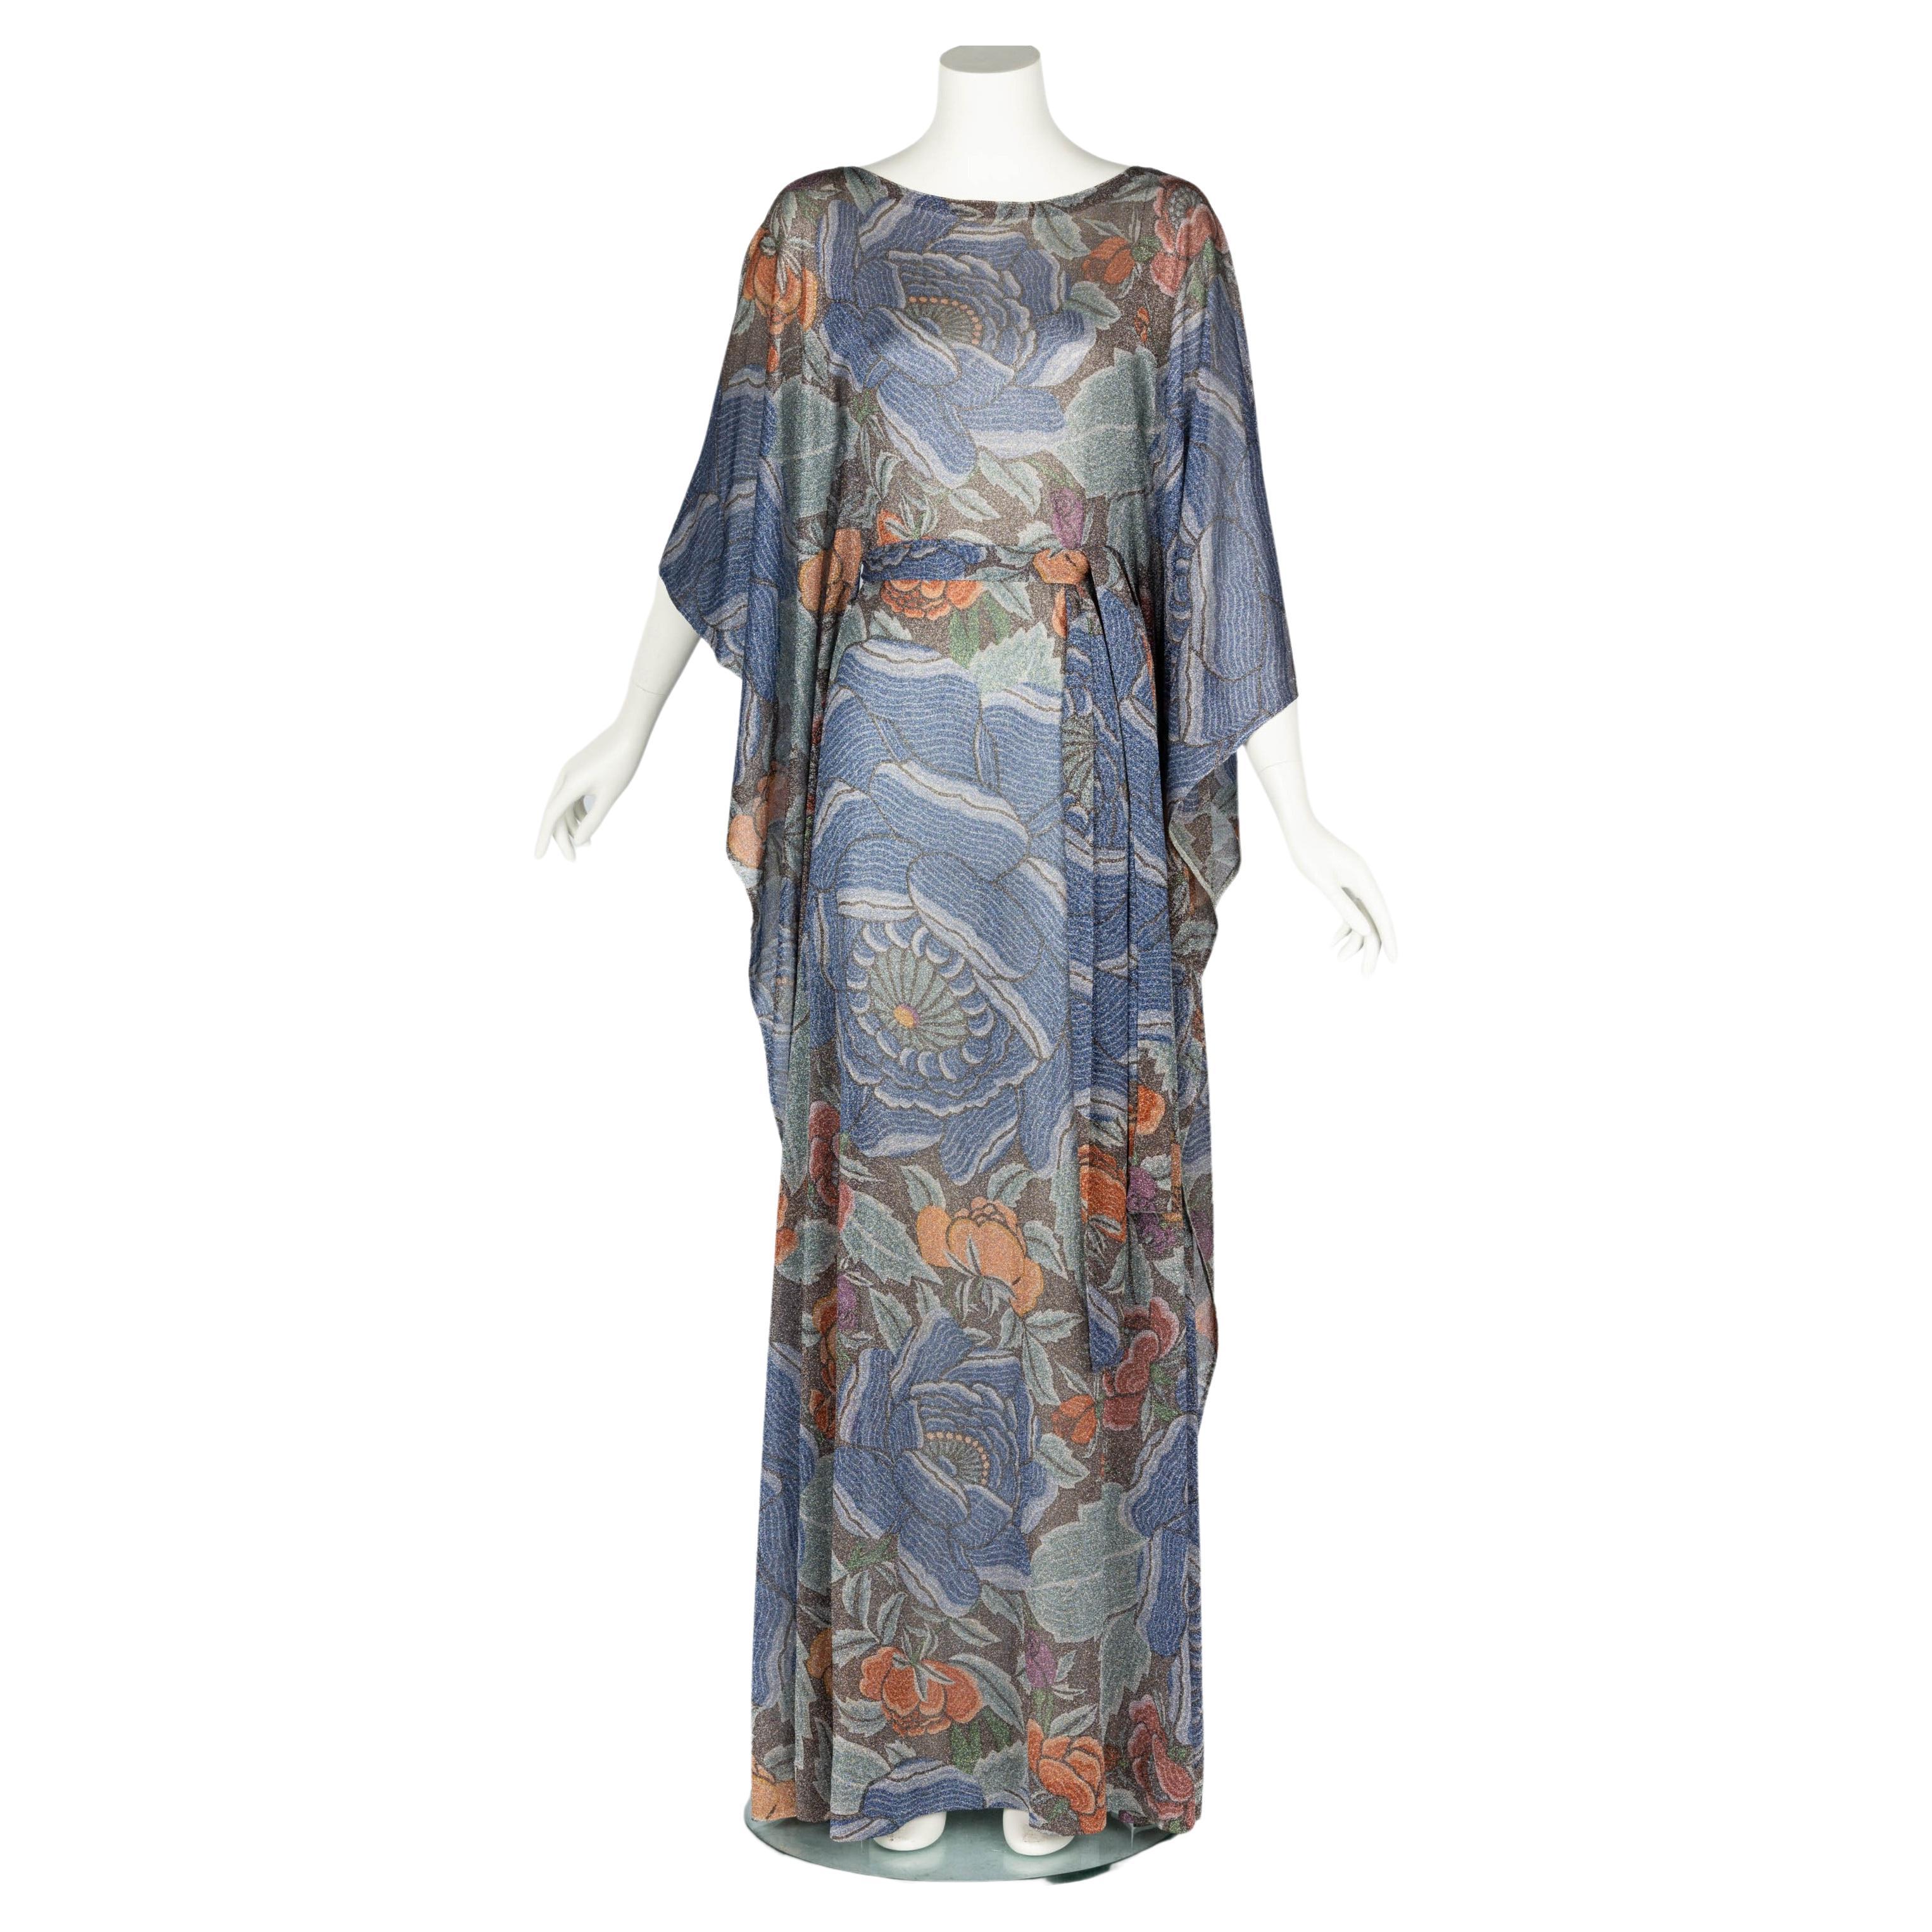 Highly coveted and collectible early 1970s rare Missoni caftan dress. Done in a beautiful lightweight metallic lurex fabric with an all-over captivating floral print.

Size estimate: X Small / Small
Shoulders: no defined seams
Bust: 32 inches
Waist: